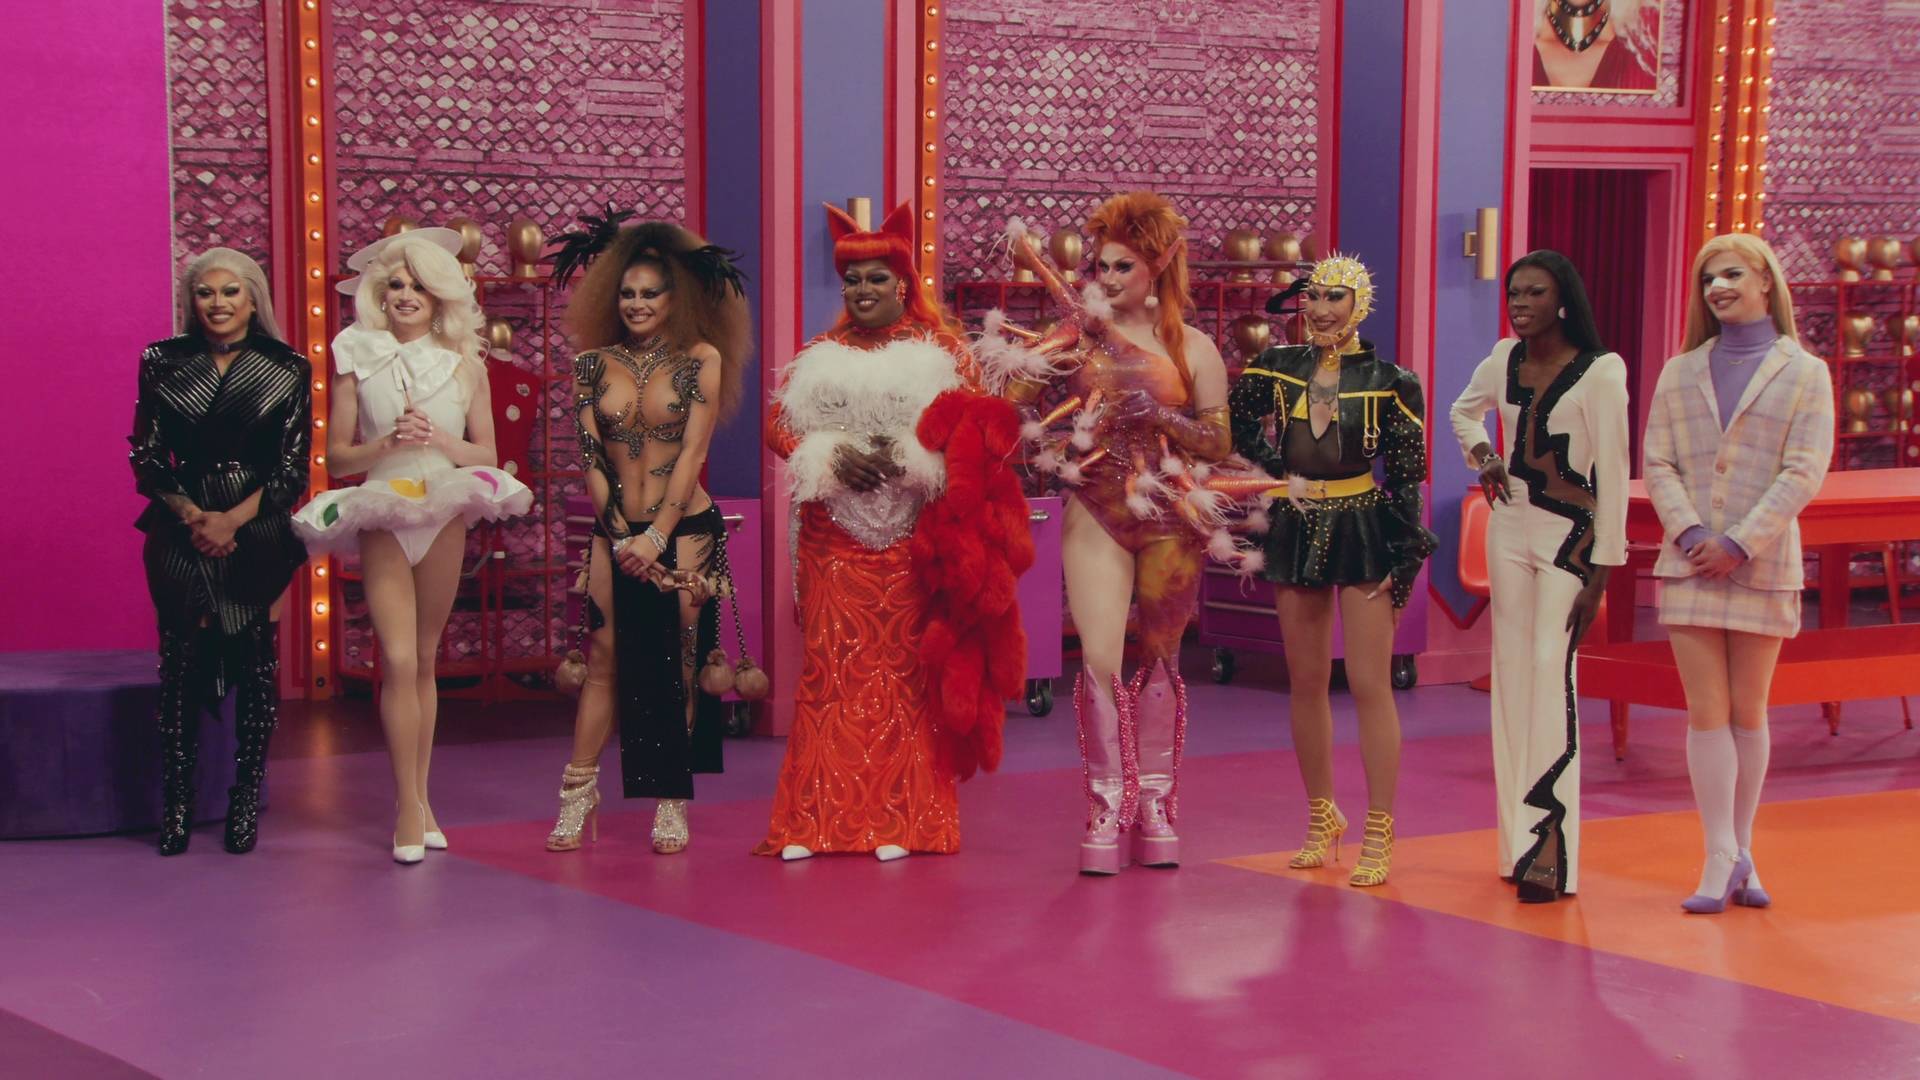 How to watch the 'RuPaul's Drag Race' season 15 premiere for free 